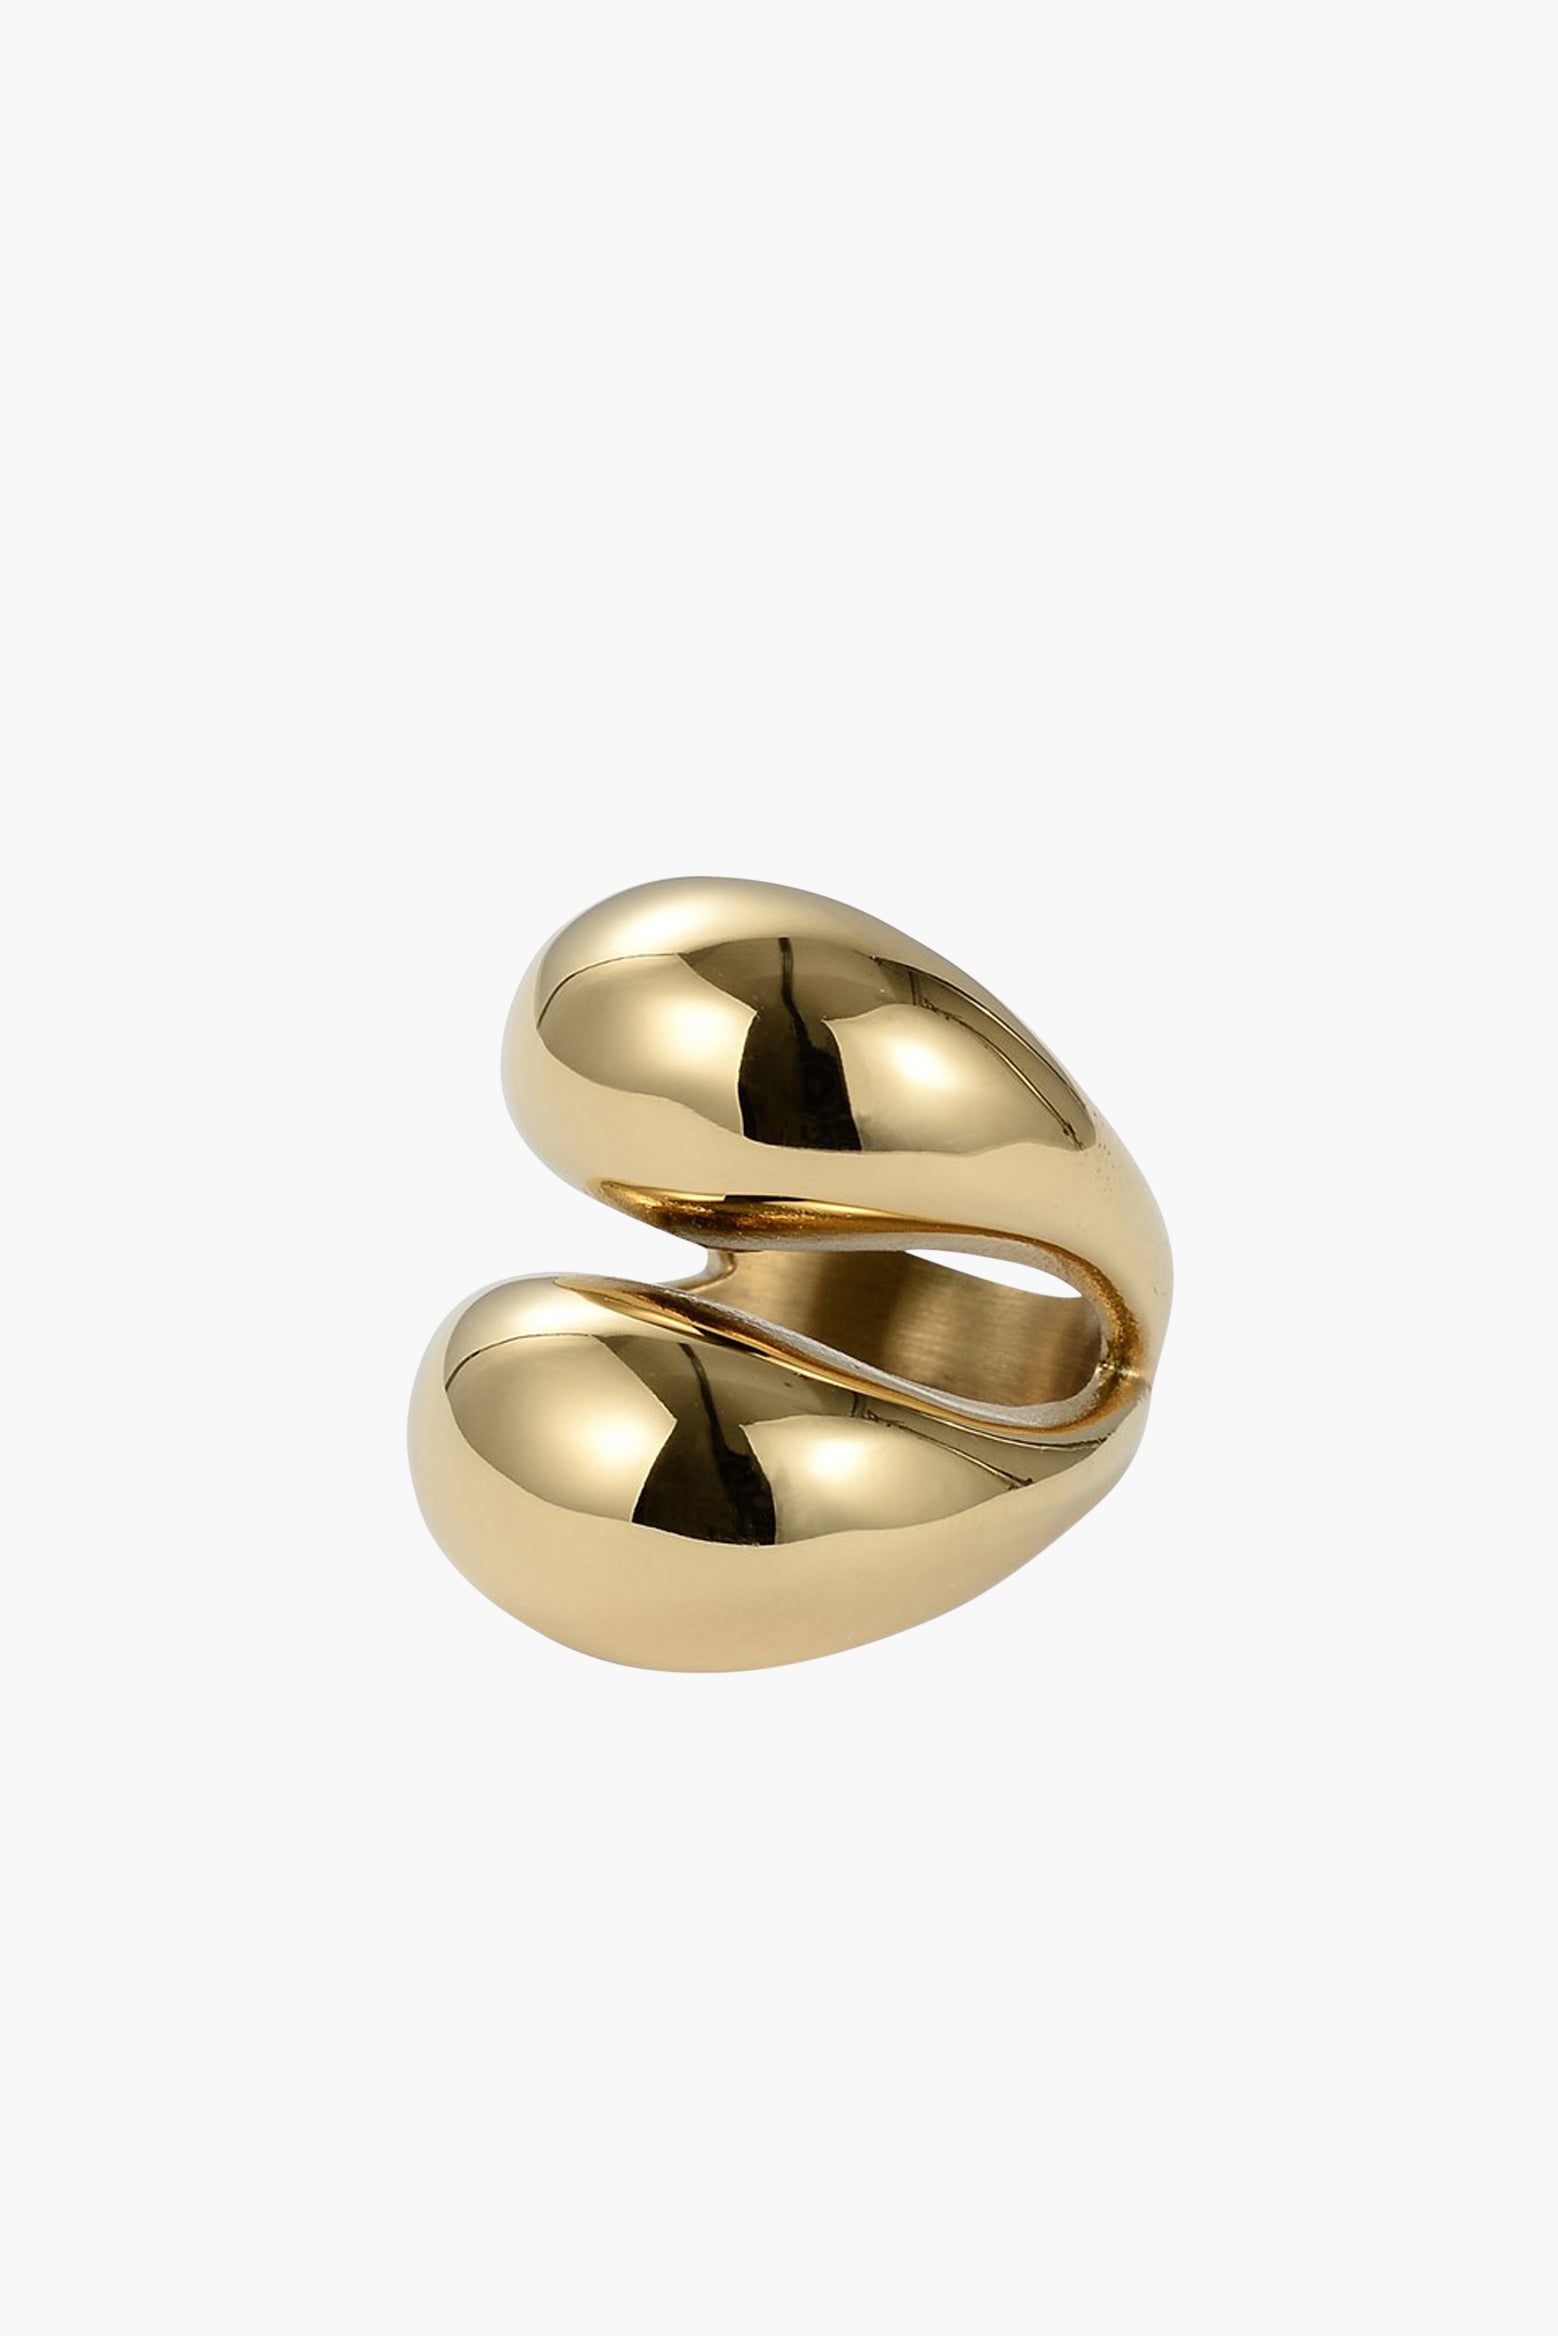 Anna Rossi Double Bubble Ring in Gold available at TNT The New Trend Australia